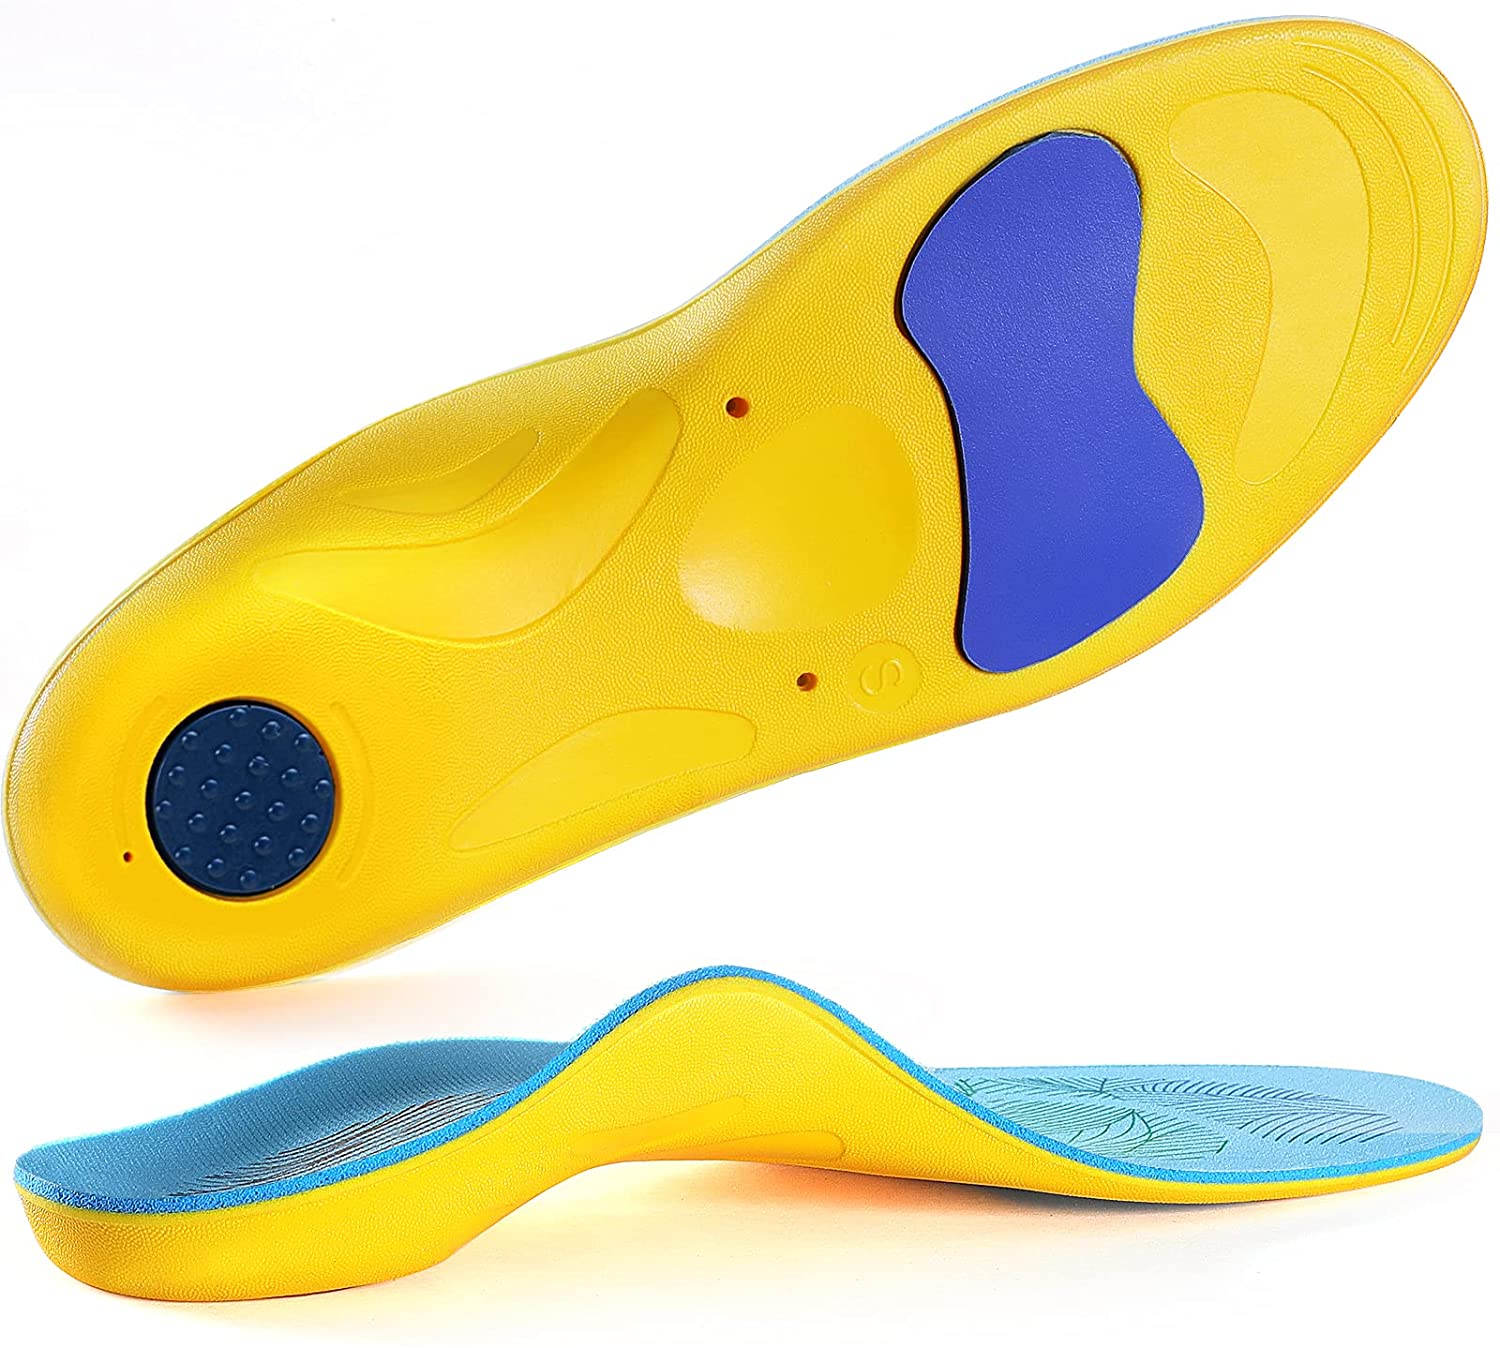 FM-406 Pain Relief Orthotics, Plantar Fasciitis High Arch Support Insoles 